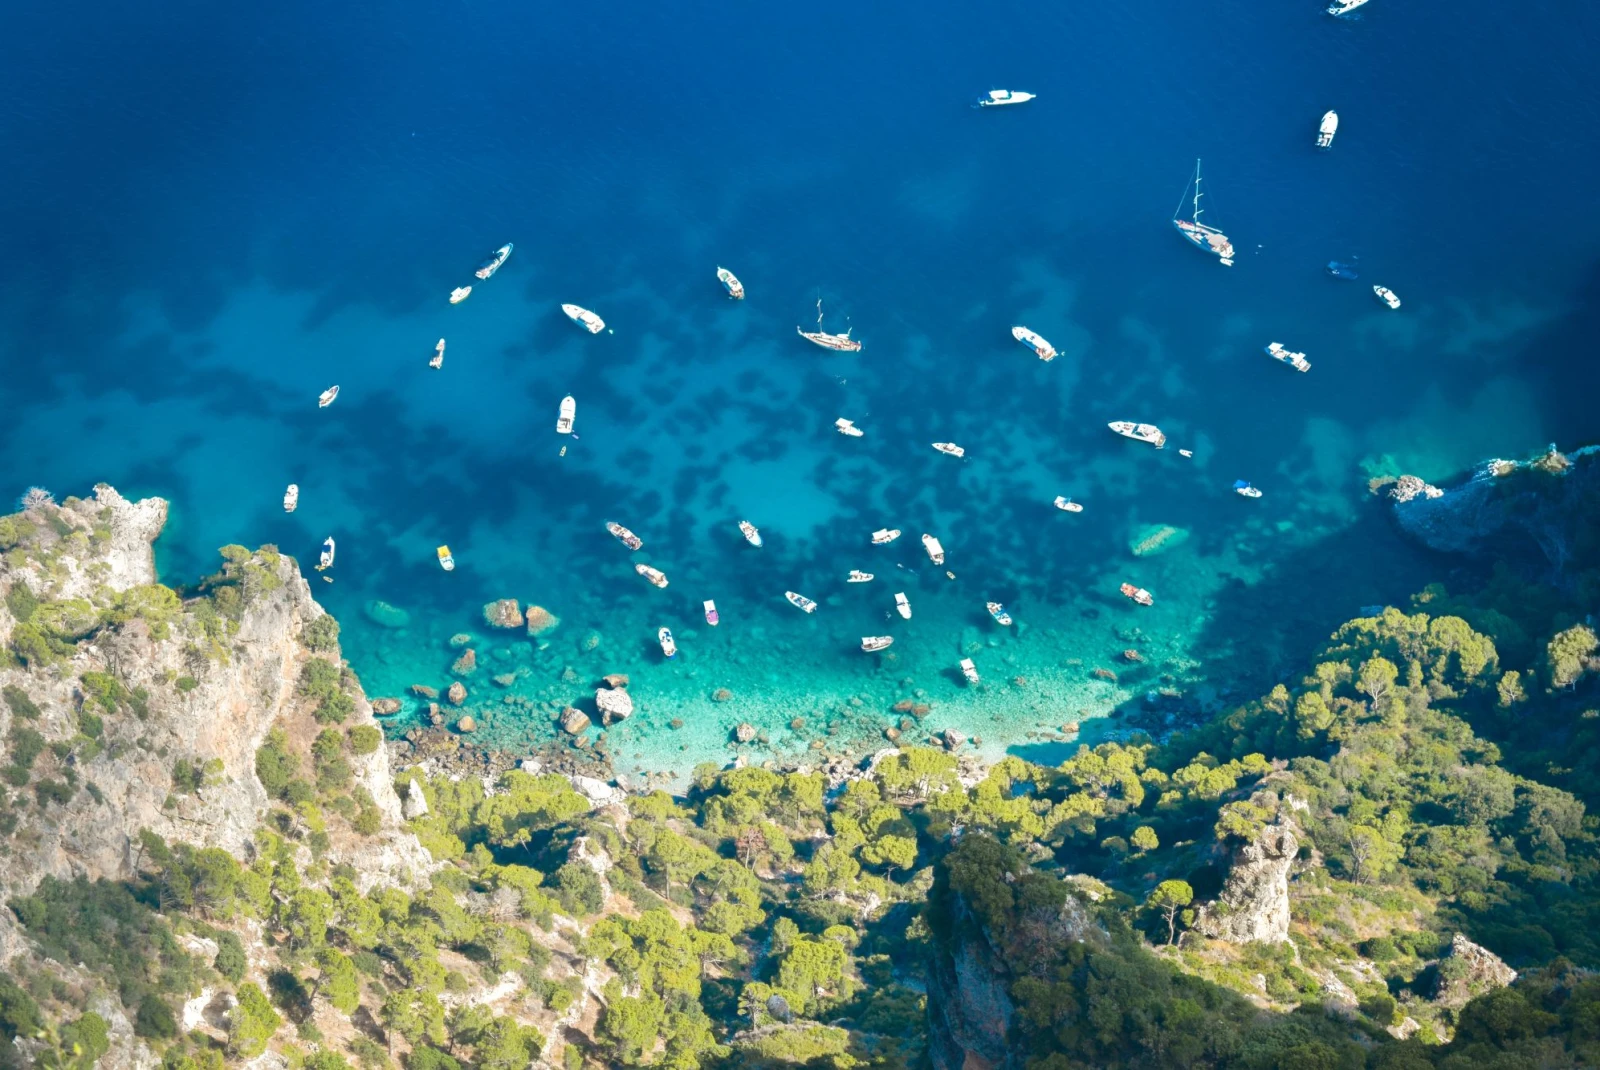 aerial view of an island coast with bright blue waters spotted by white boats